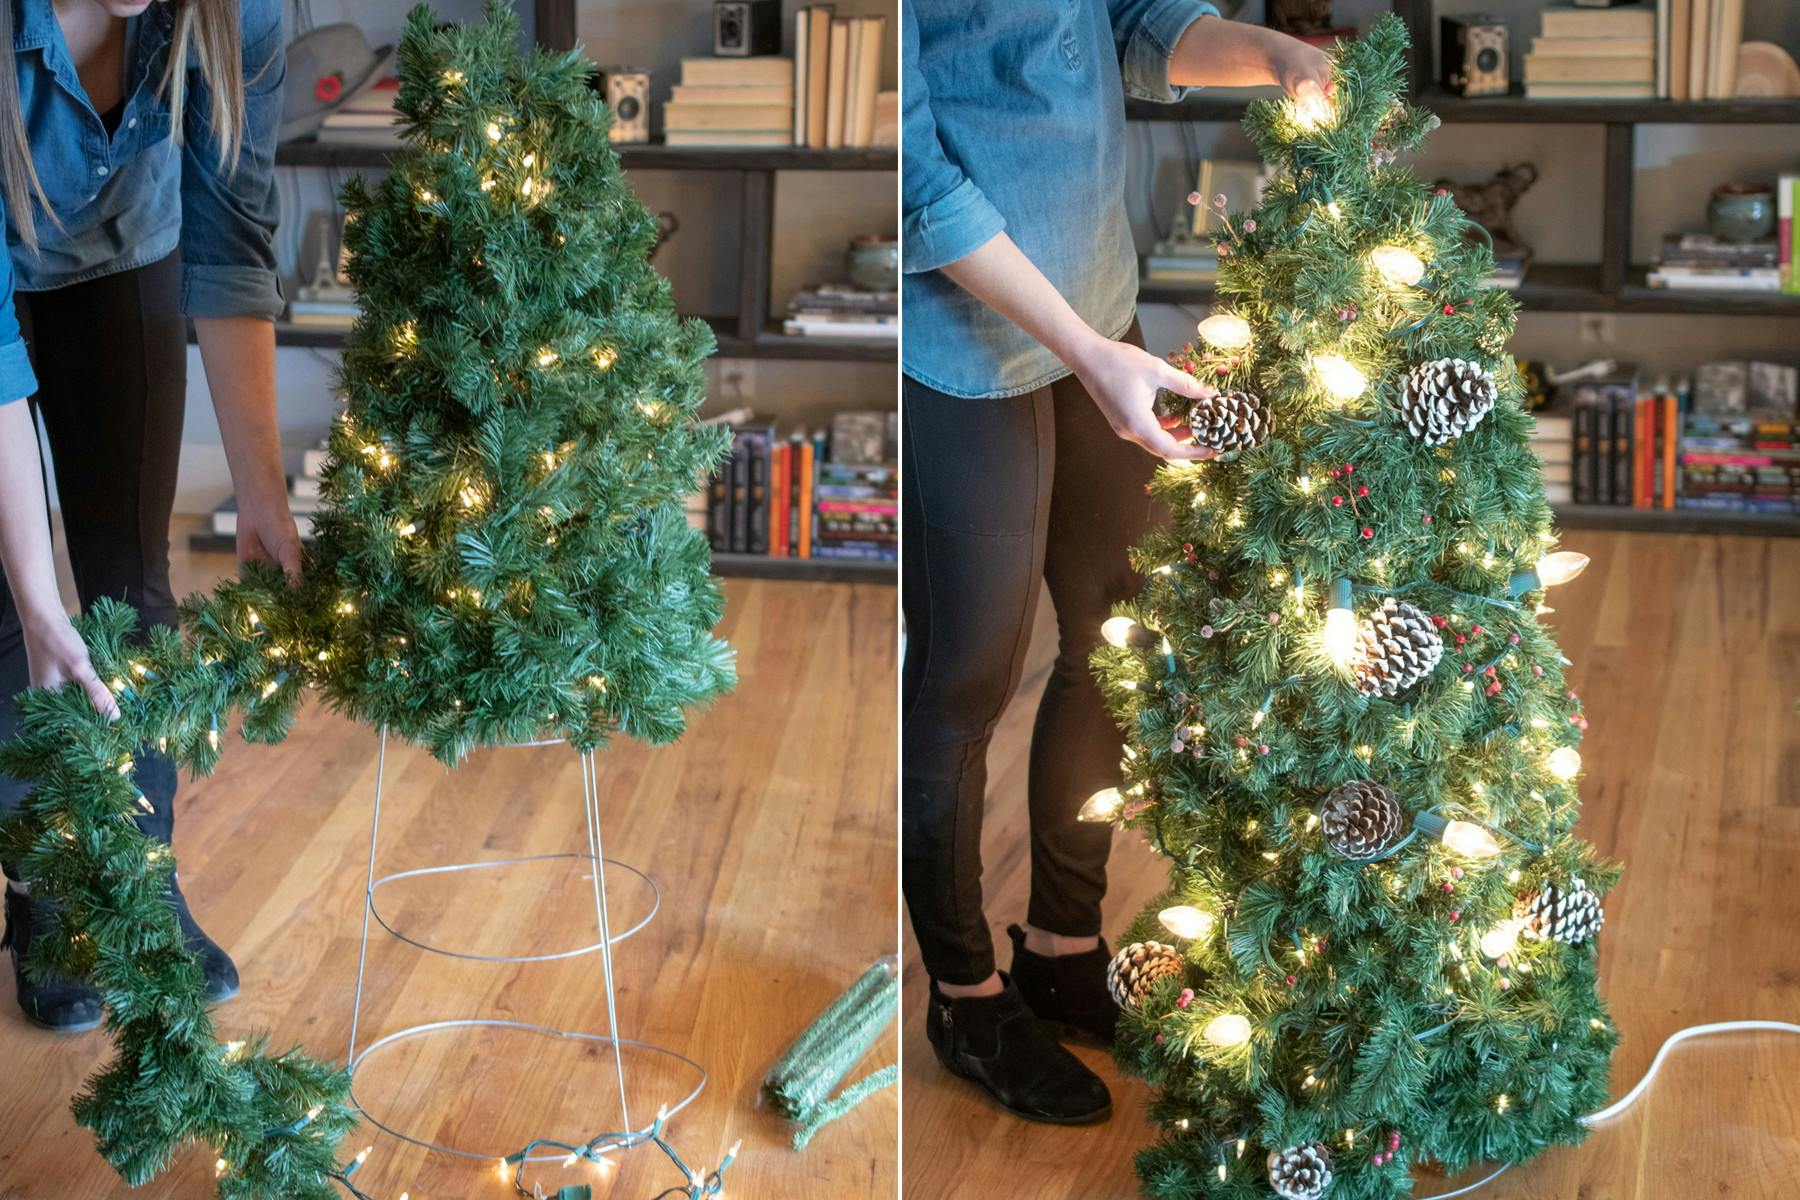 A small lit Christmas tree made from garland, lights, and a tomato cage.